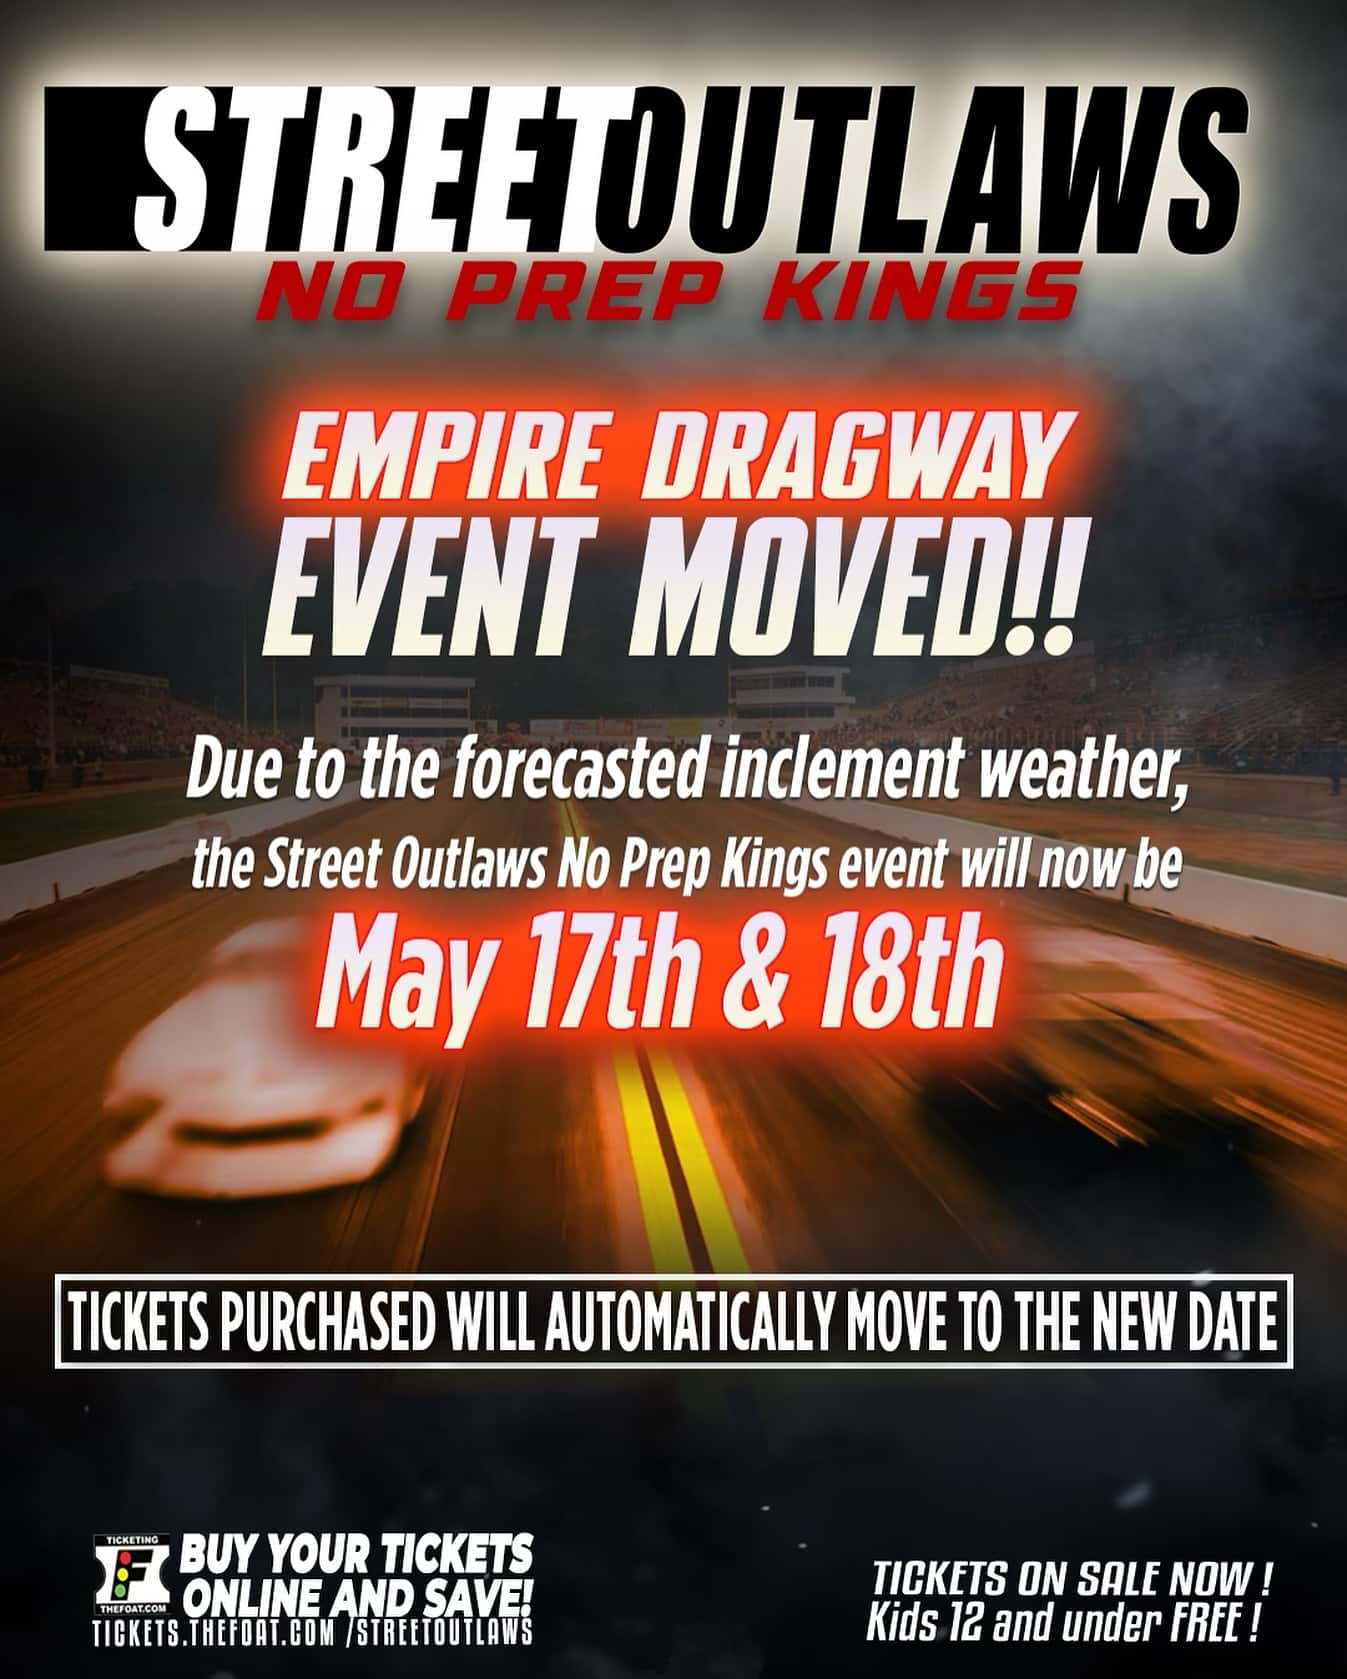 Empire Dragway Event Moved!